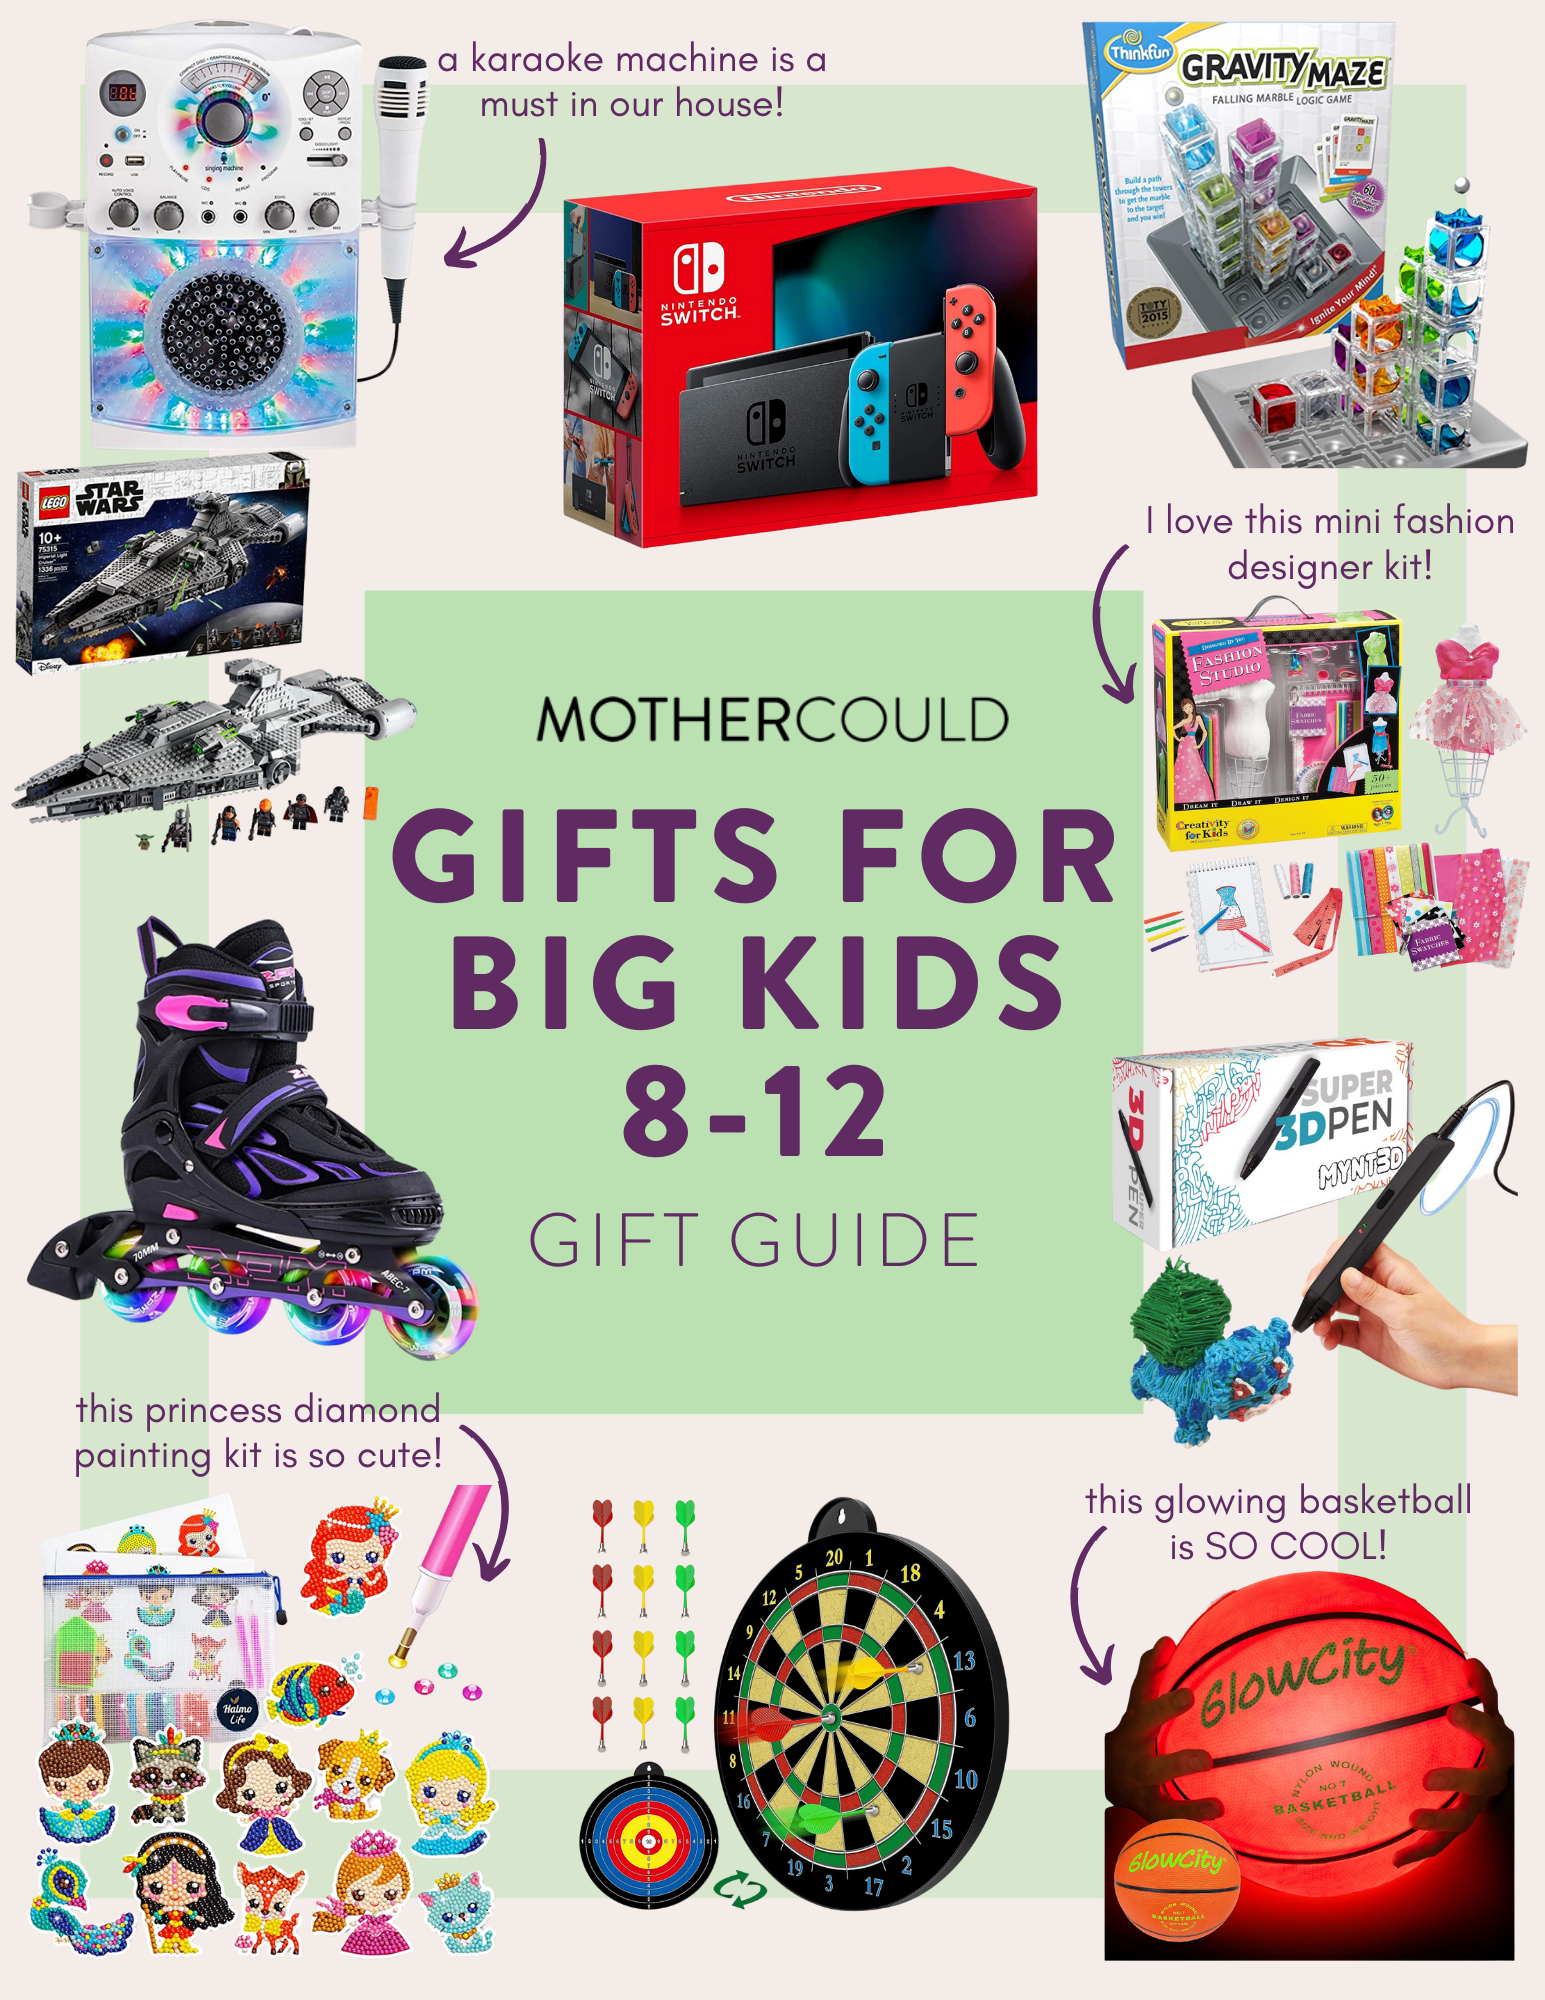 HOLIDAY GIFT GUIDE: FAMILY EDITION